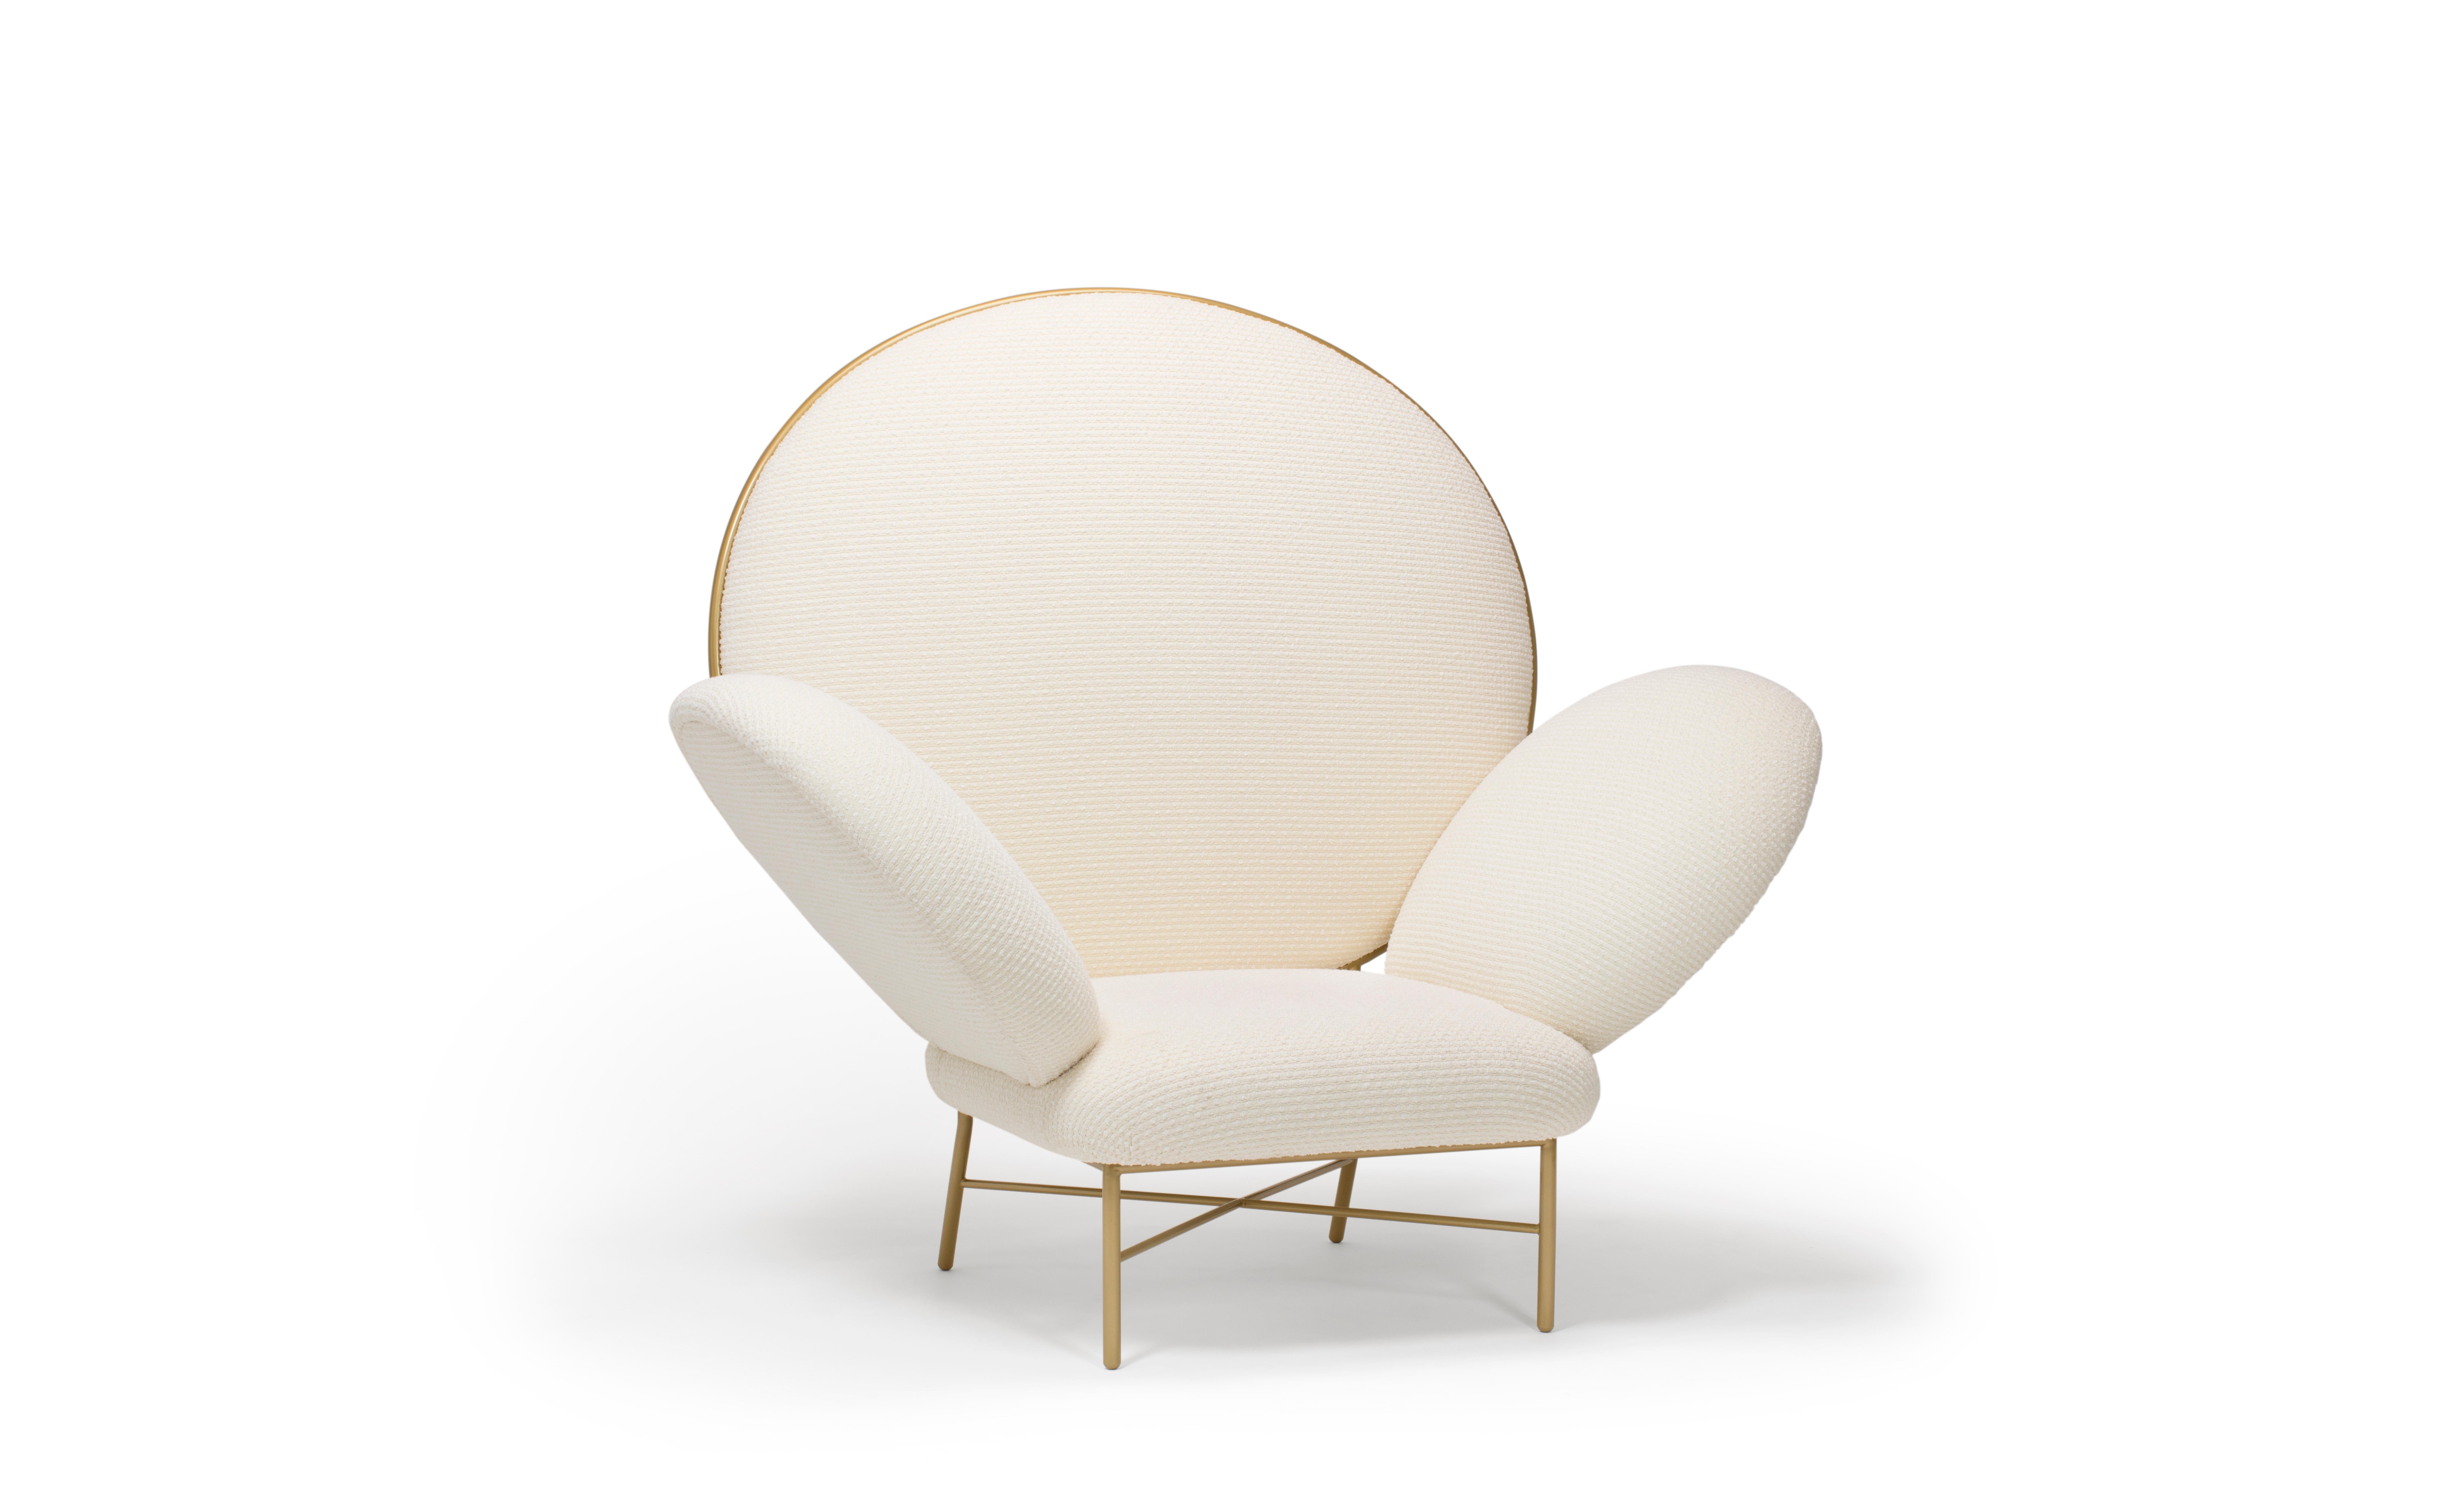 Contemporary ivory upholstered armchair - stay armchair by Nika Zupanc for Se.

Design: Nika Zupanc
Frame upholstered in Dedar Karakorum fabric. Available also in a choice of leathers or fabrics, or in customer’s own material or leather.
Powder